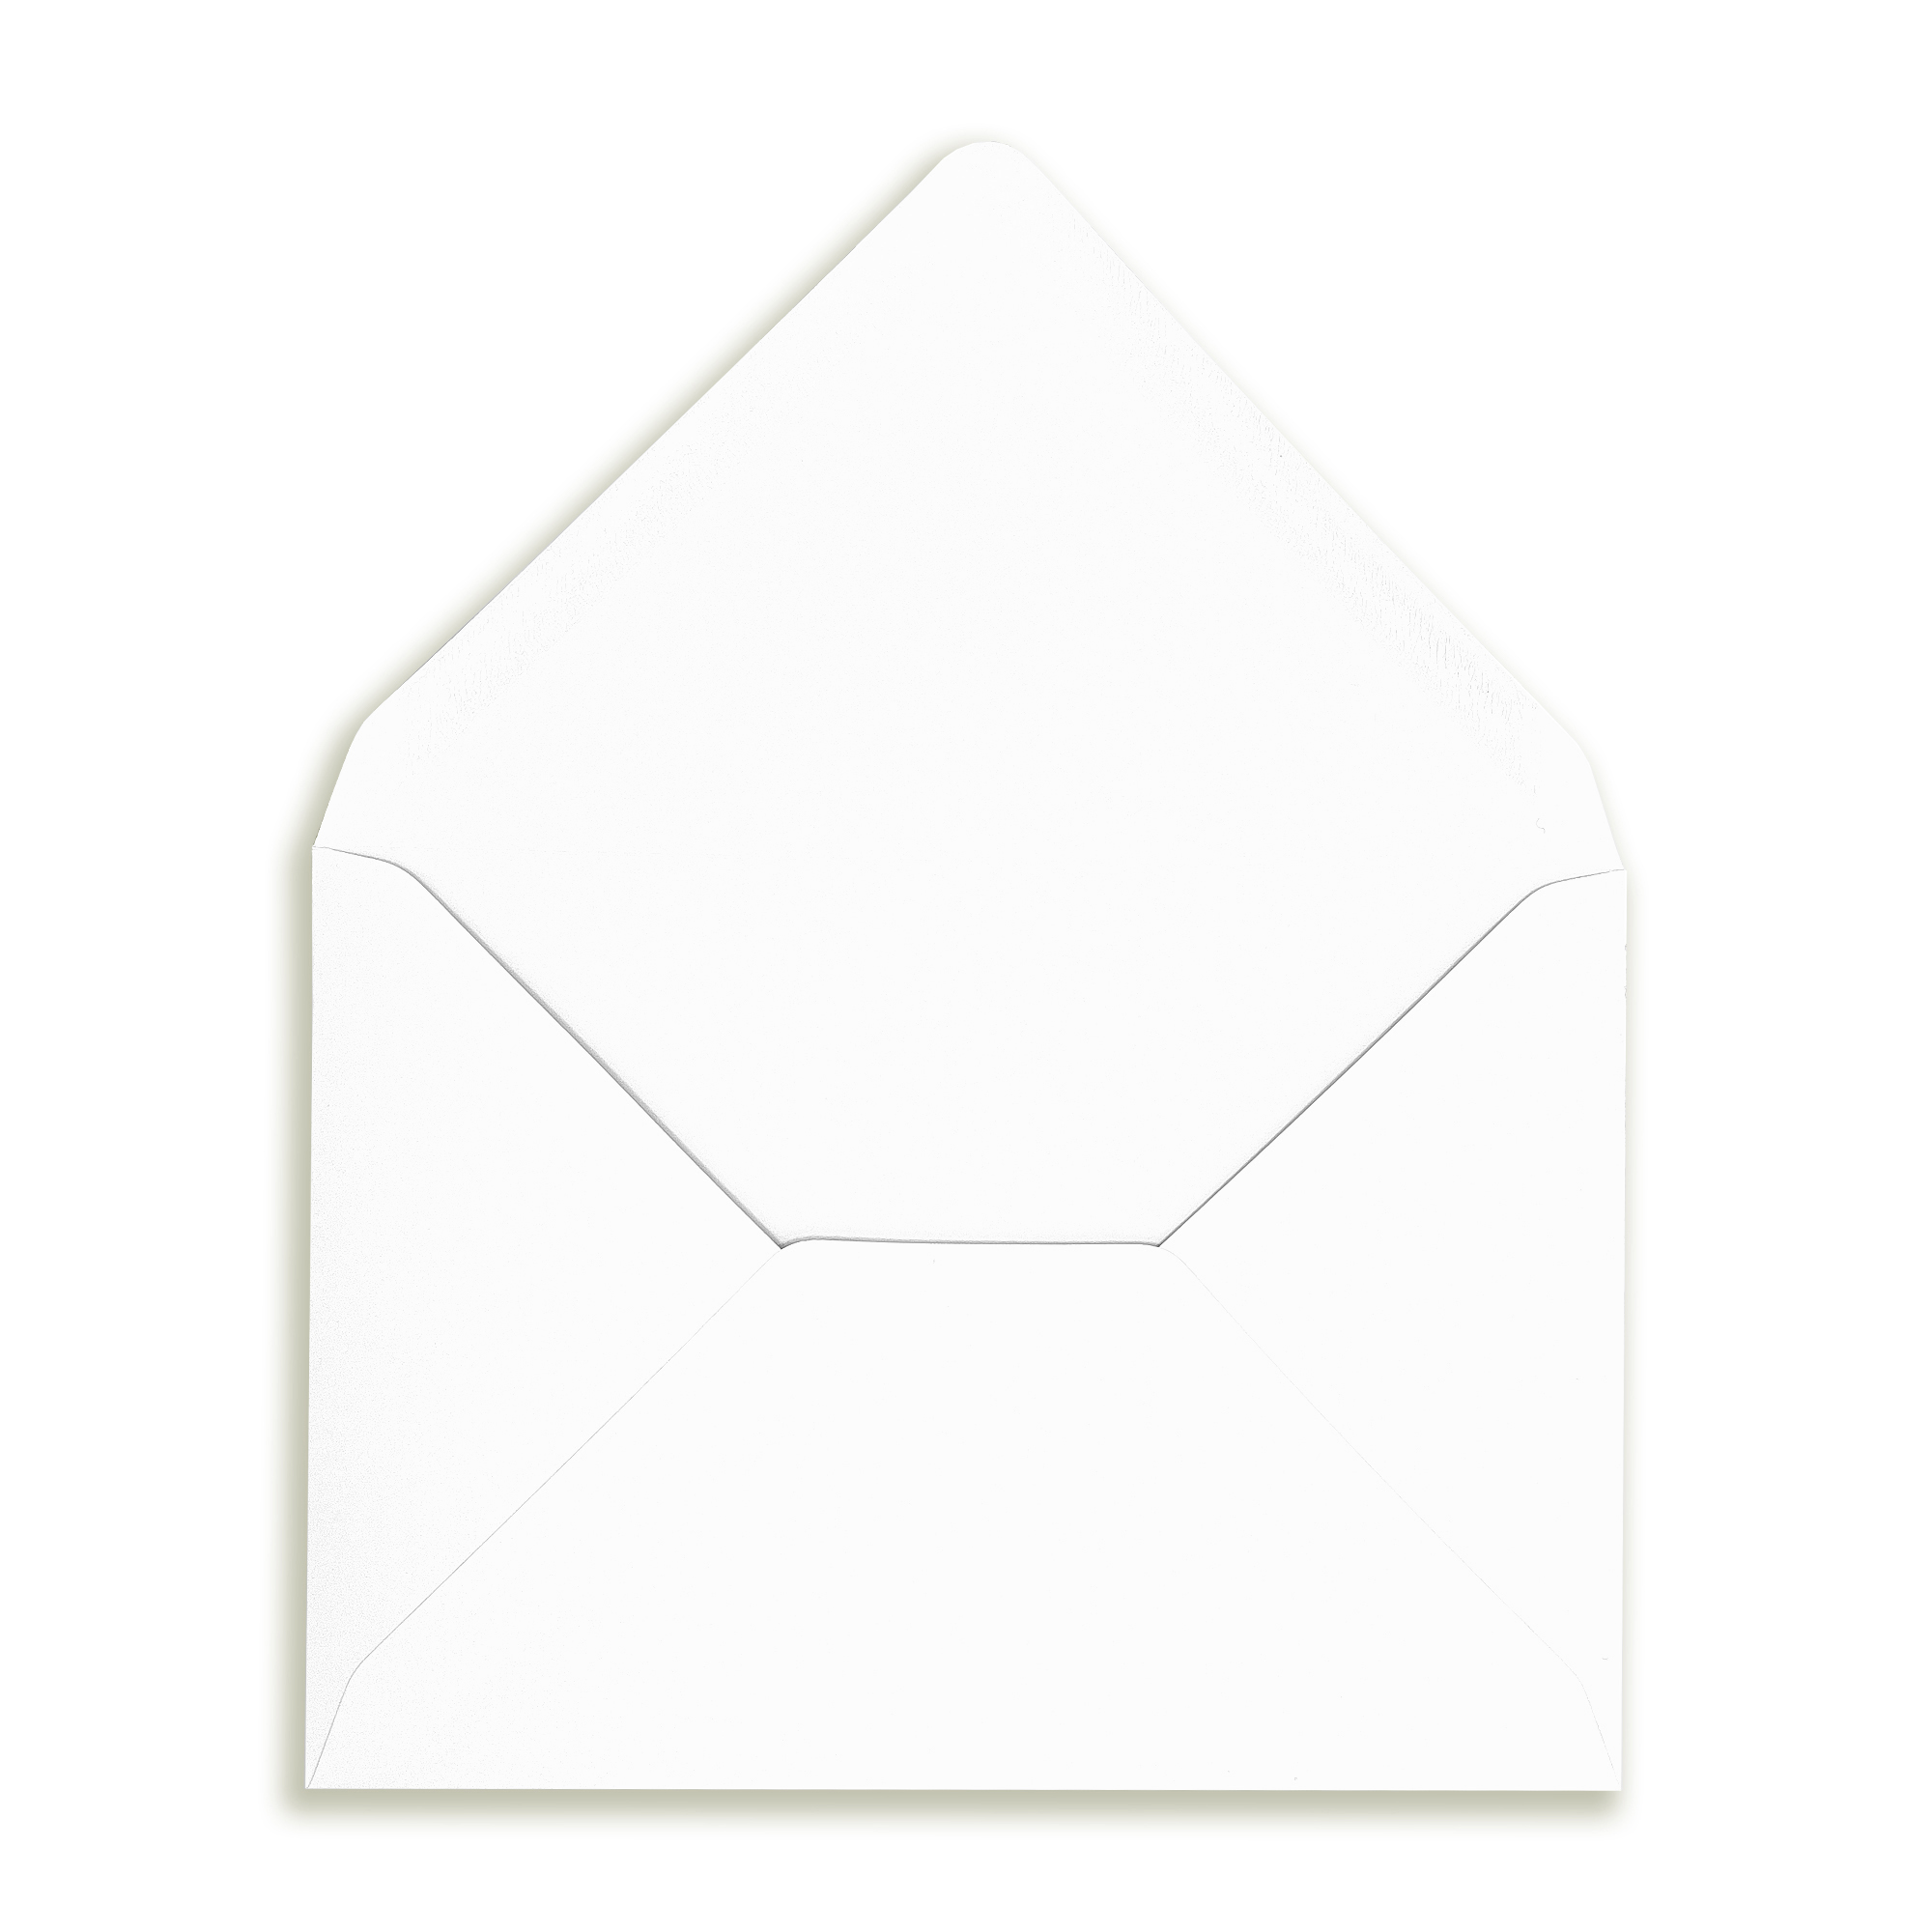 accent_white_recycled_120gsm_Envelope_open